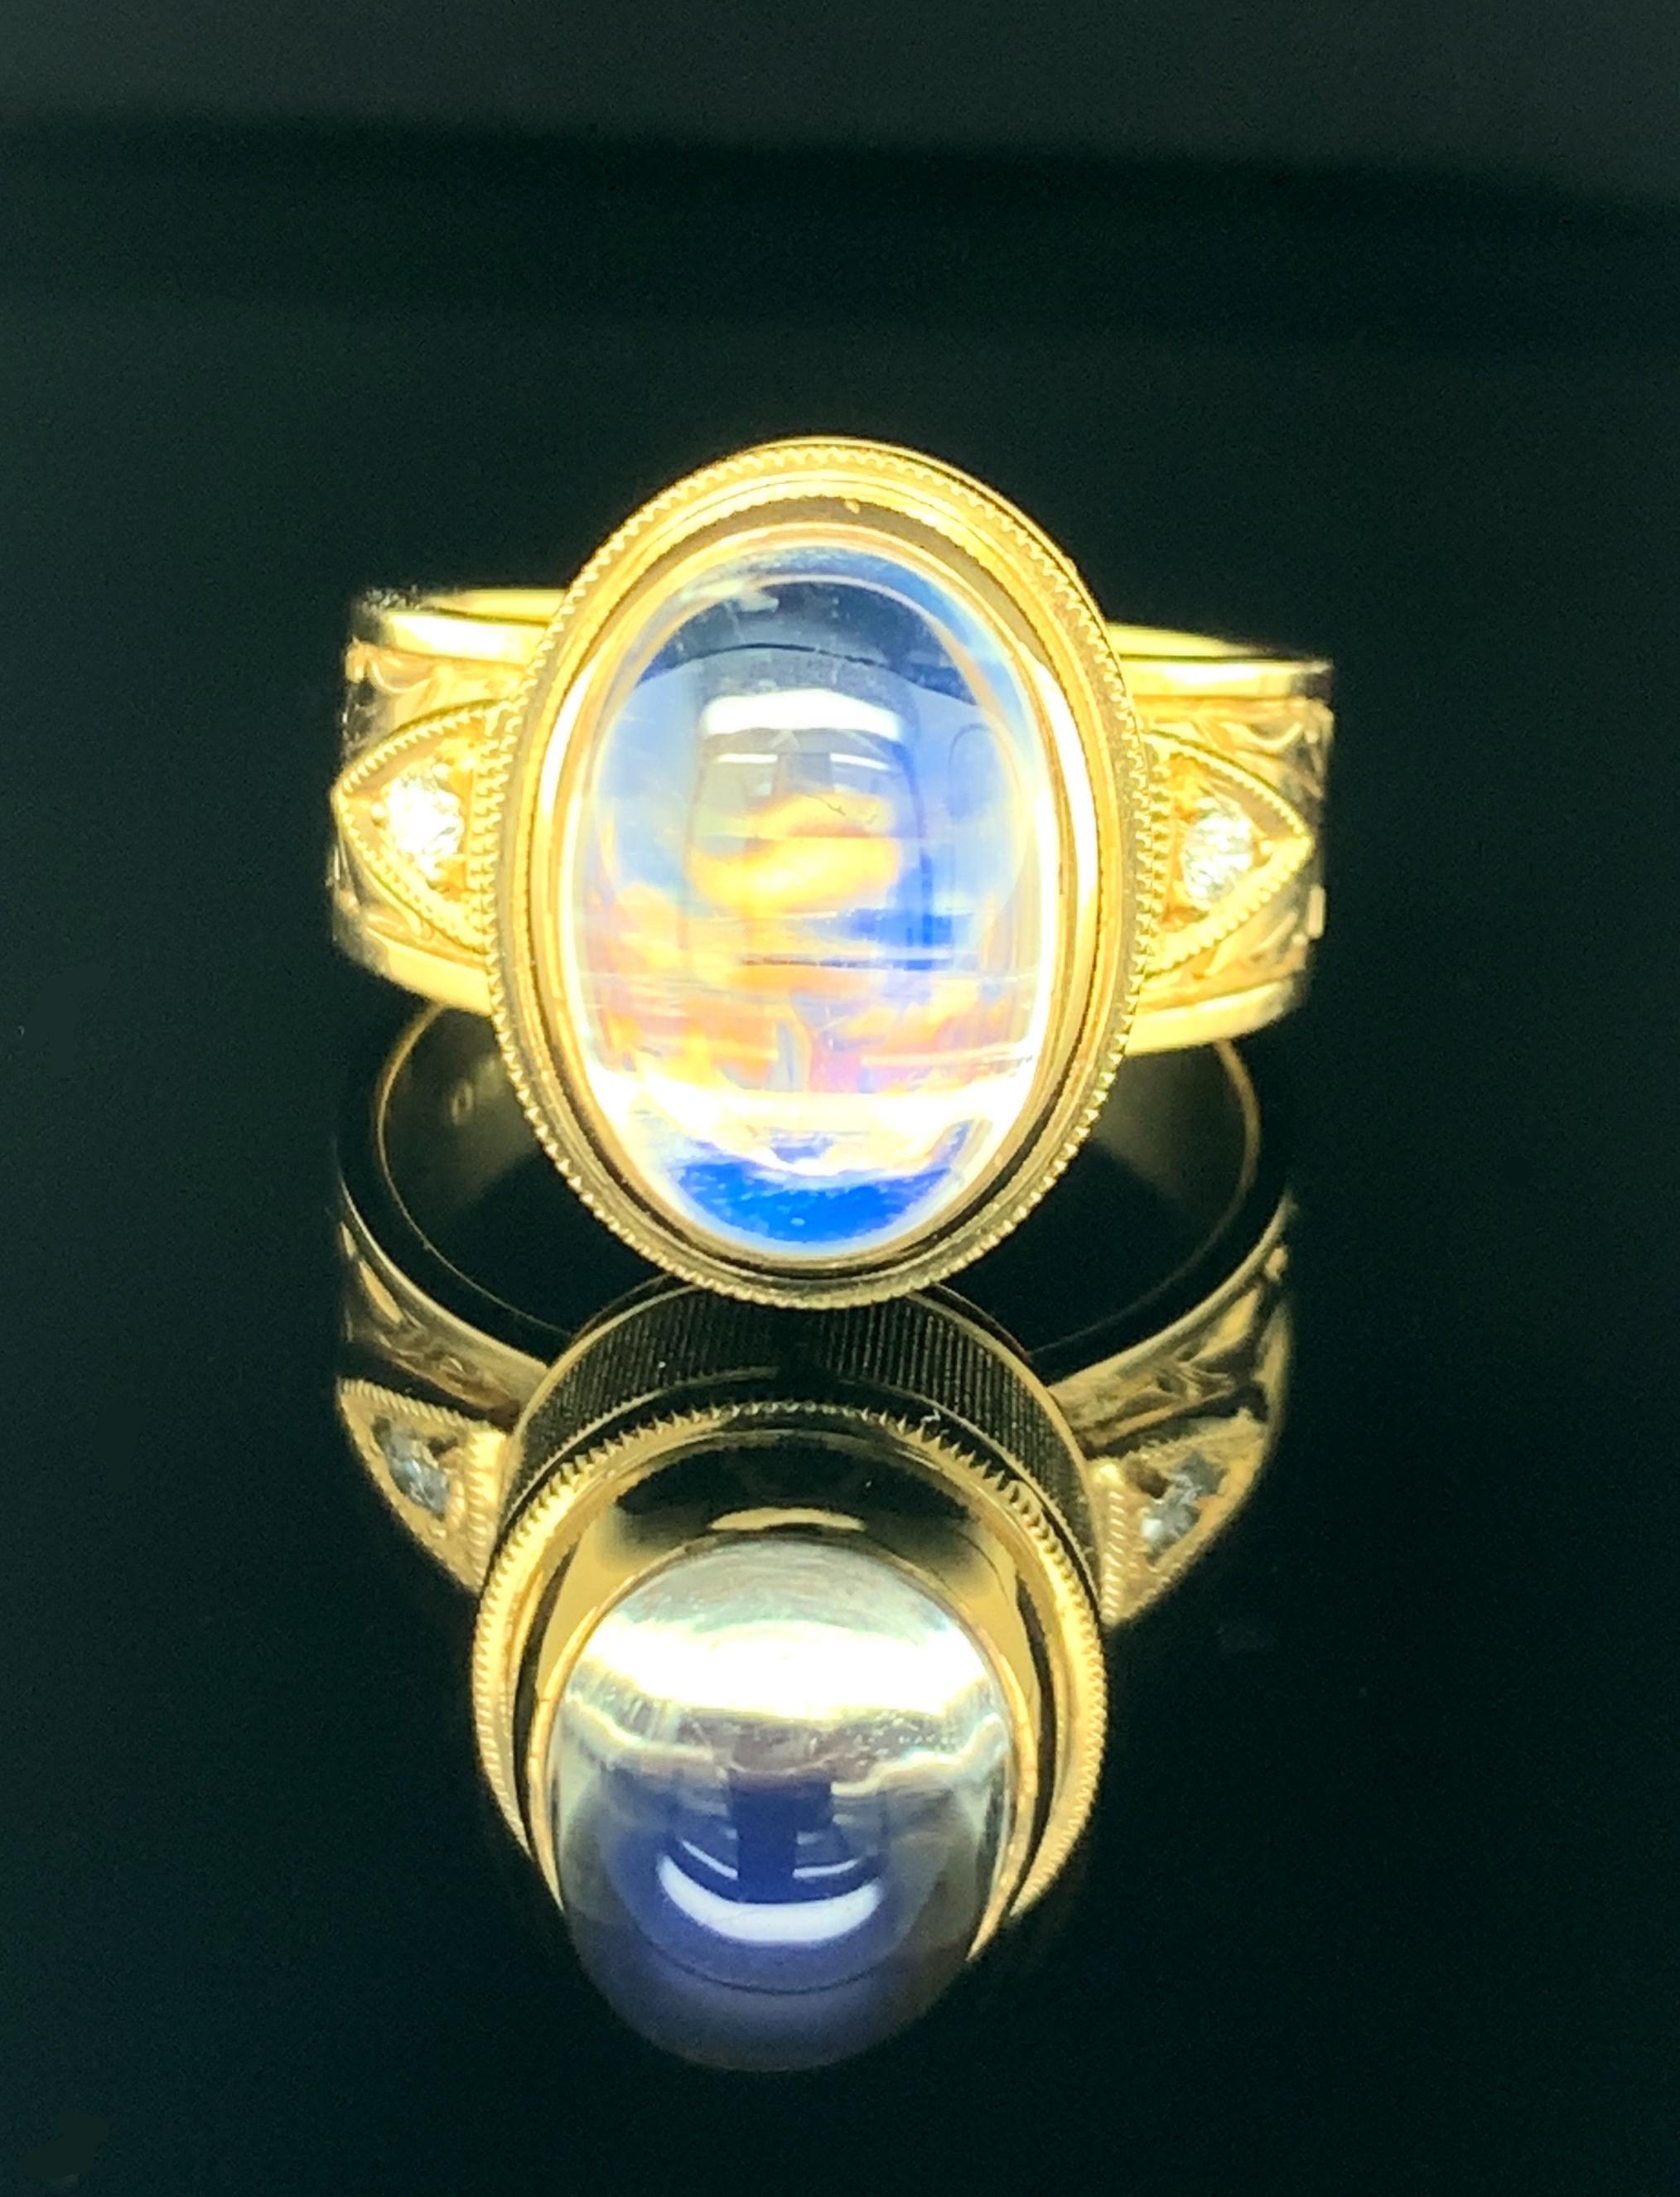 This elegant 18k yellow gold handmade ring features a 6.48 carat moonstone with gorgeous blue flash adularescence. Adularescence, or 